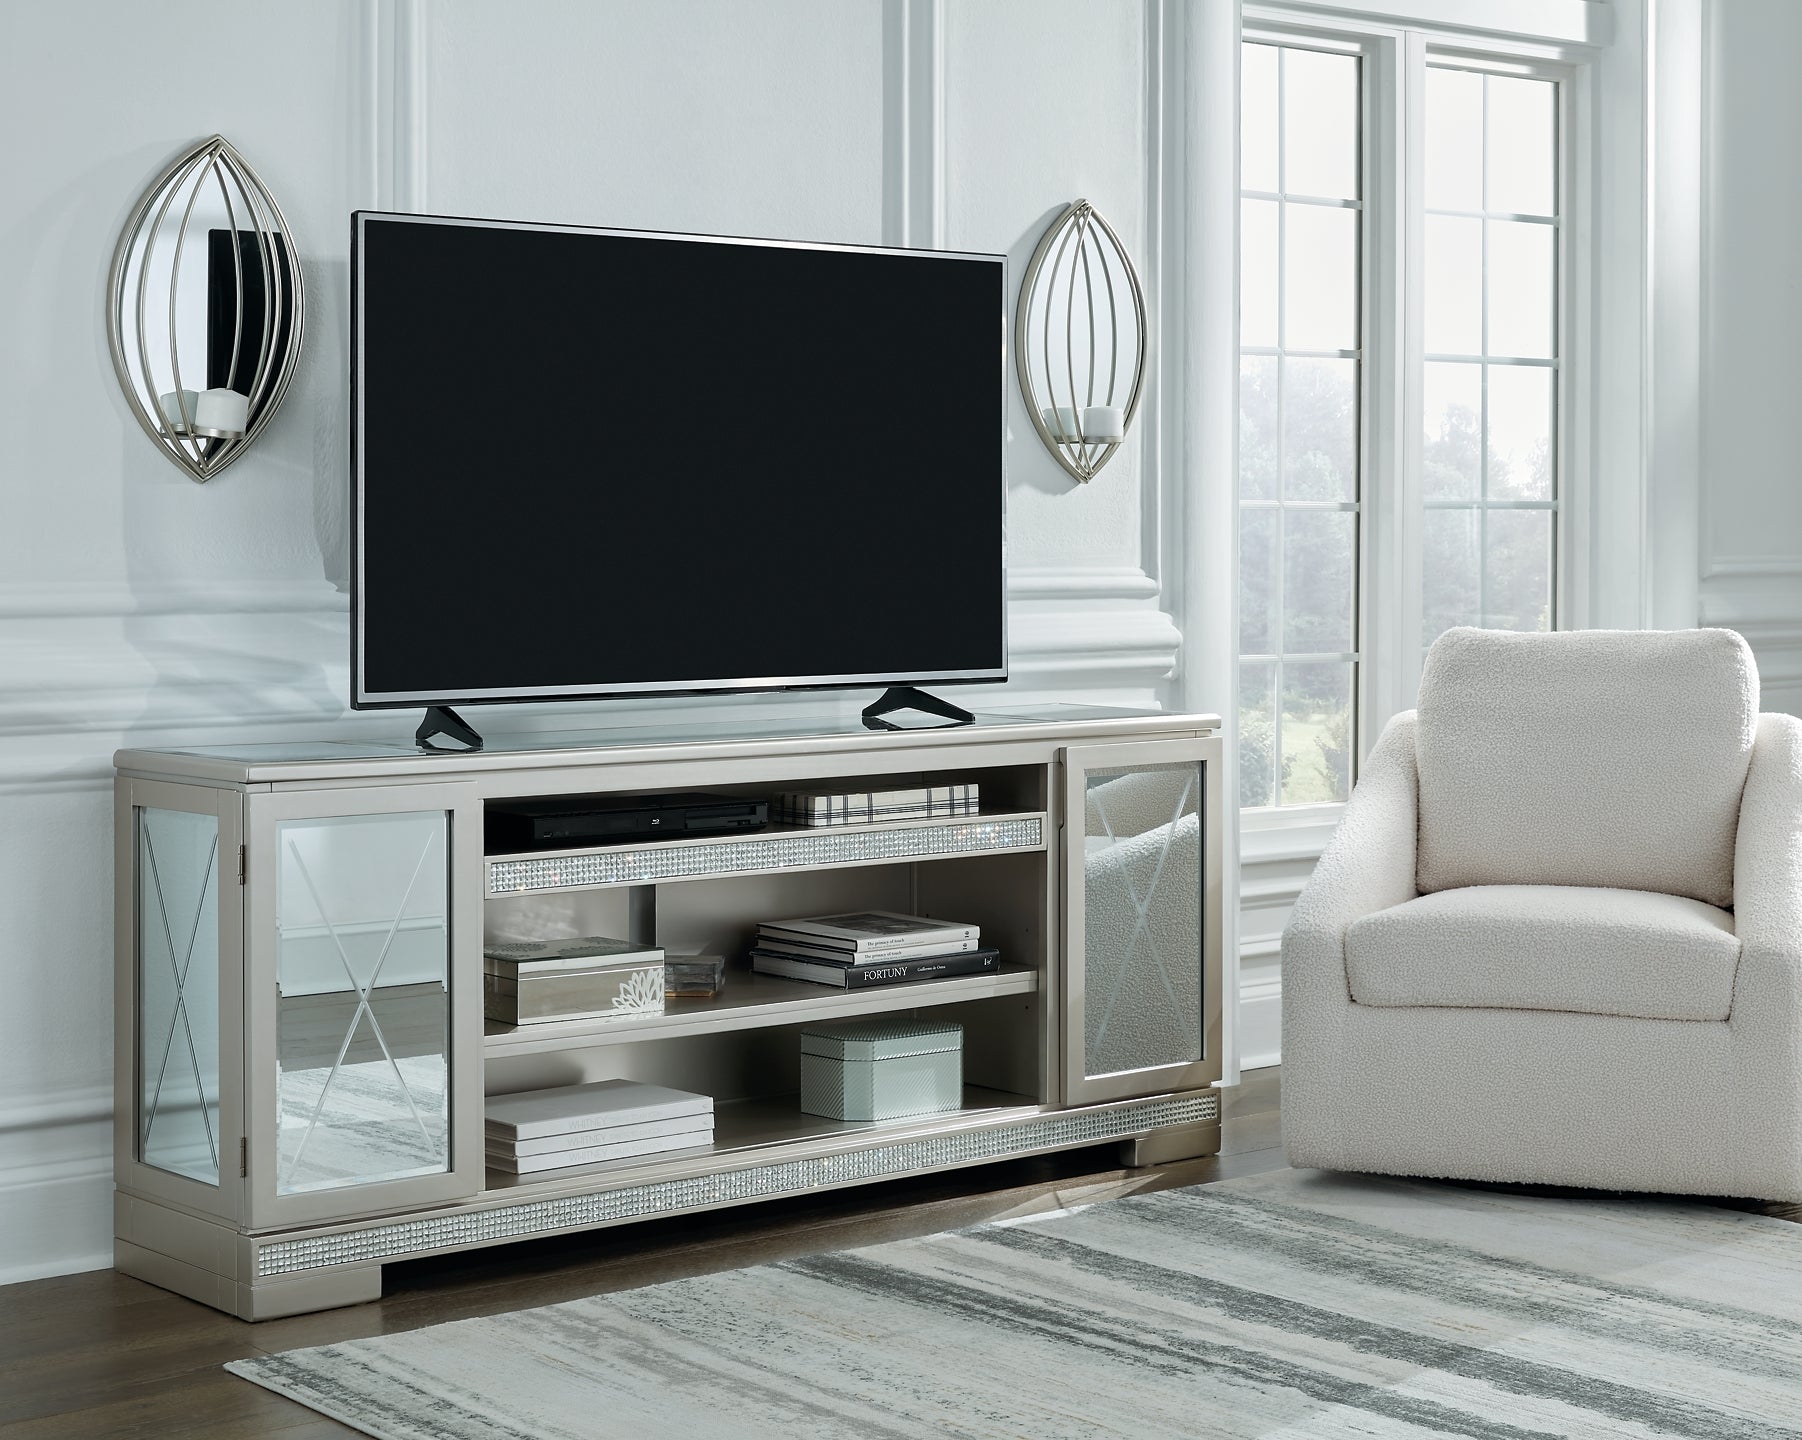 Flamory LG TV Stand w/Fireplace Option Wilson Furniture (OH)  in Bridgeport, Ohio. Serving Bridgeport, Yorkville, Bellaire, & Avondale